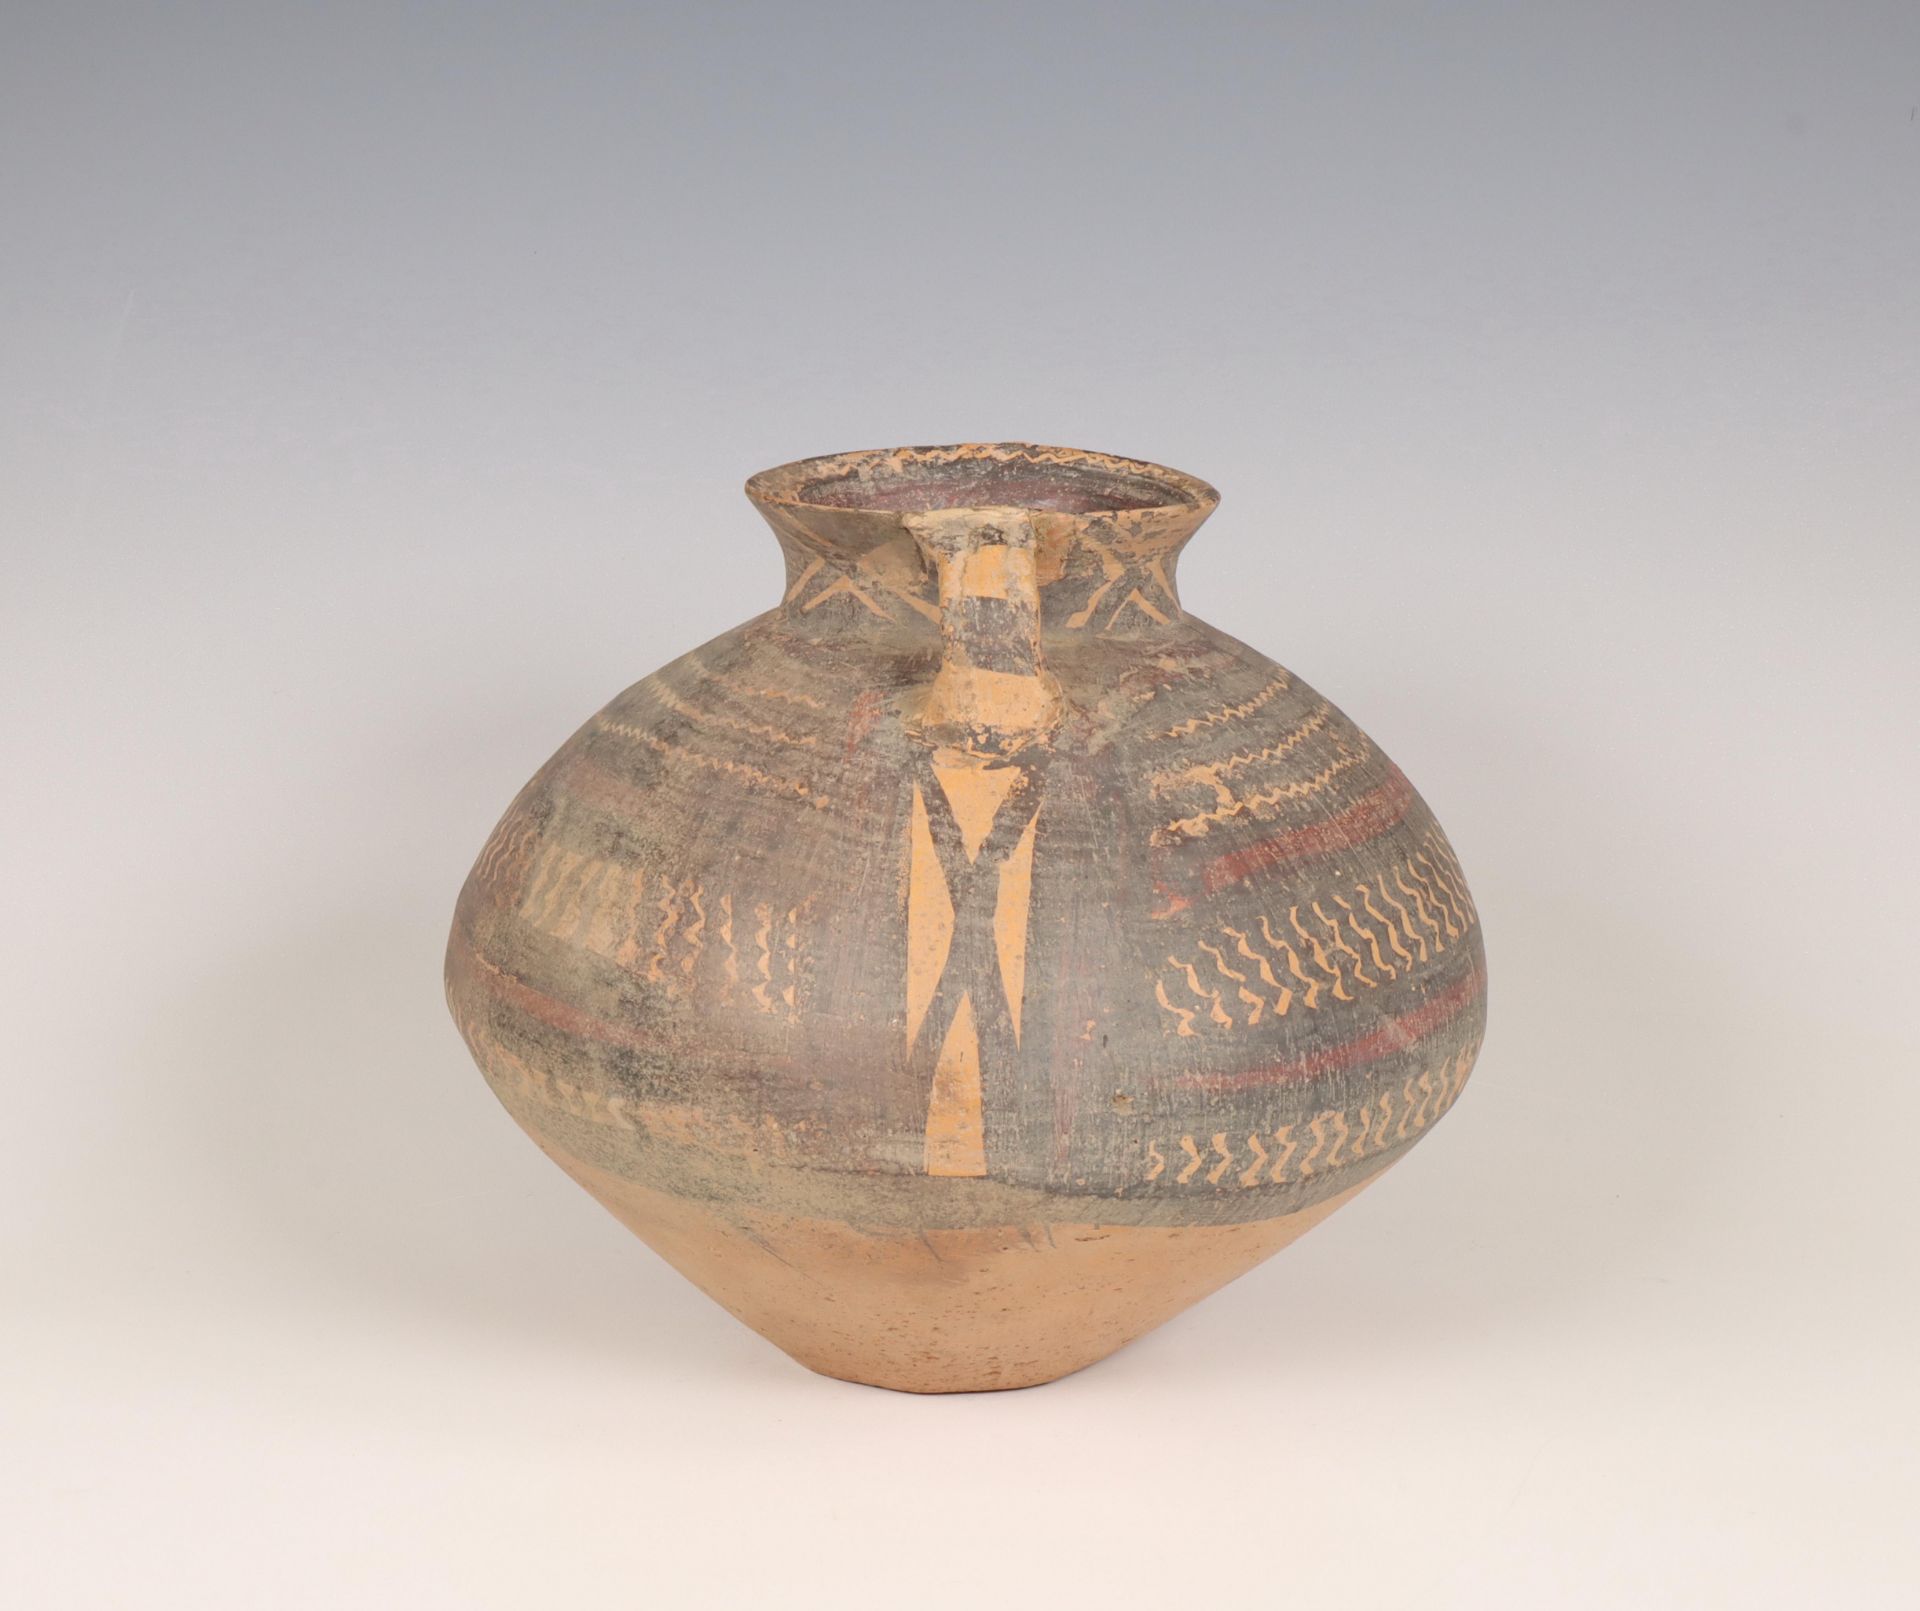 China, earthenware pot, Majiayao culture, Machang phase, late 3rd millennium BC, - Image 3 of 6